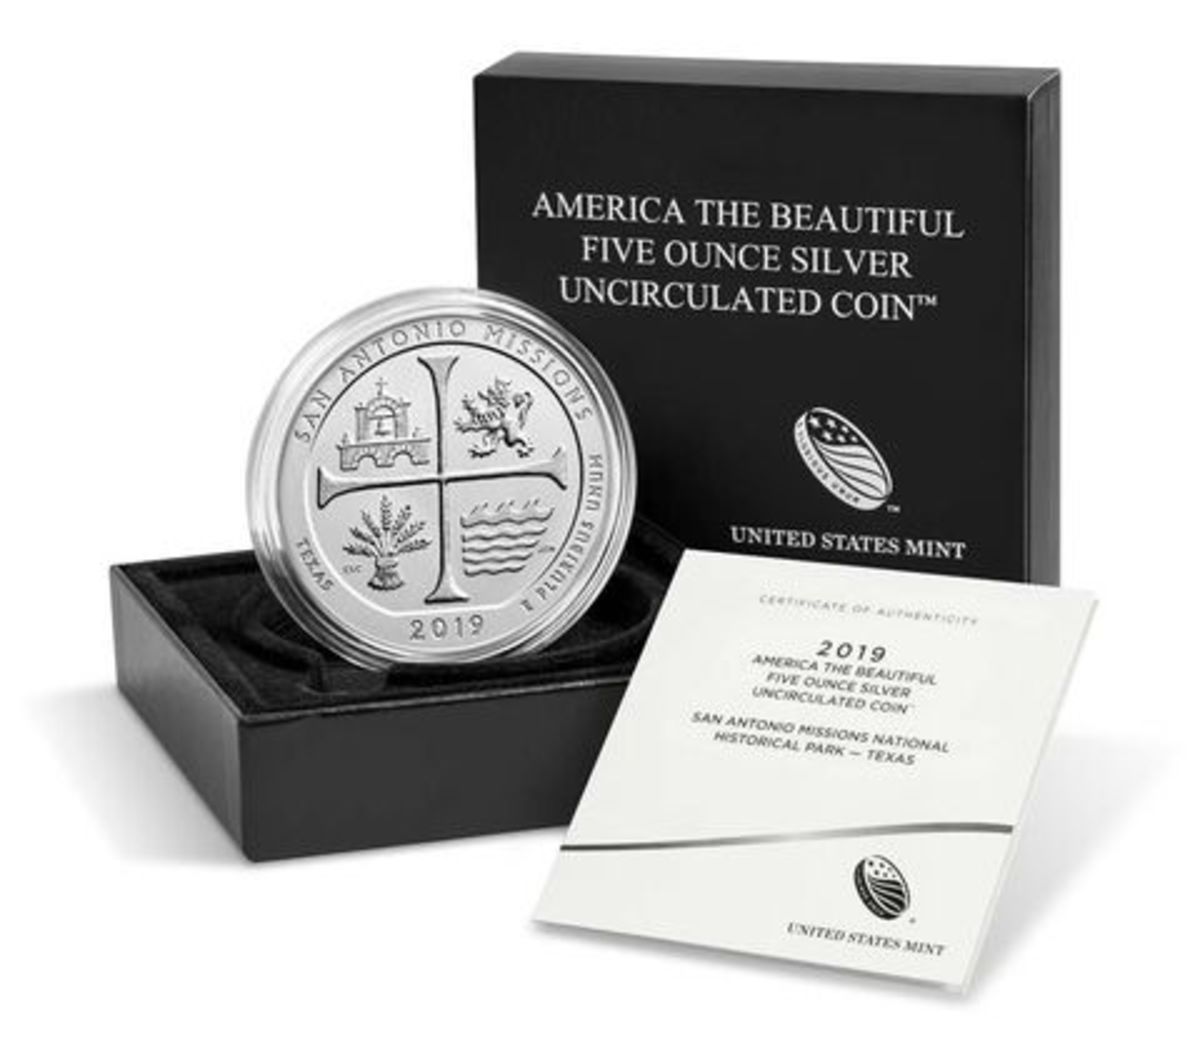 Each of the 5-ounce coins includes 99.9 percent silver and is delivered in a keepsake box accompanied by a certificate of authenticity.  (Image courtesy of the United States Mint)